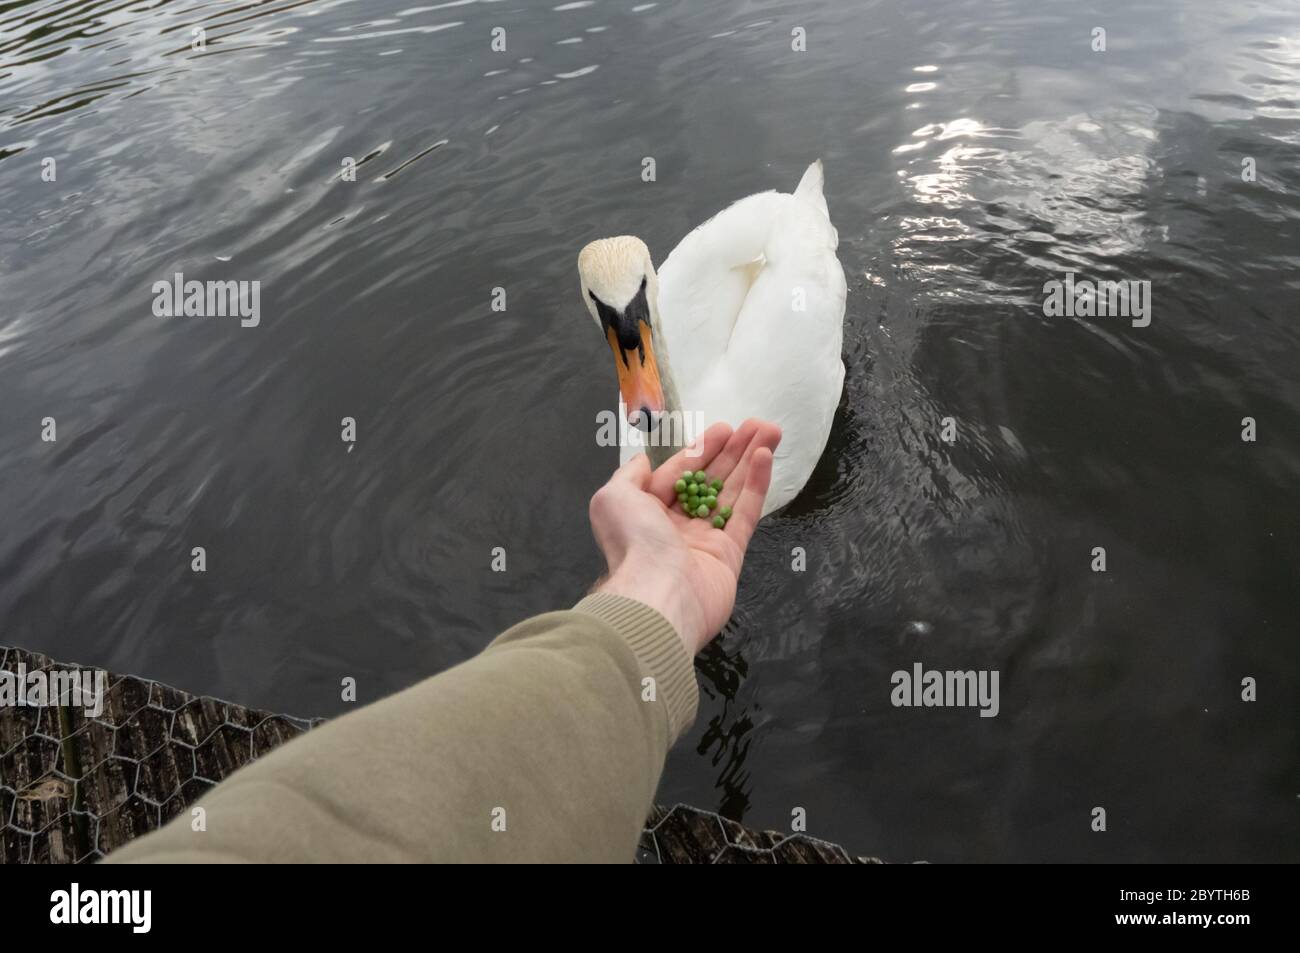 Person with outstretched hand offering peas to a mute swan, a healthier alternative to bread - feed, eat, eating, human interaction with animals Stock Photo